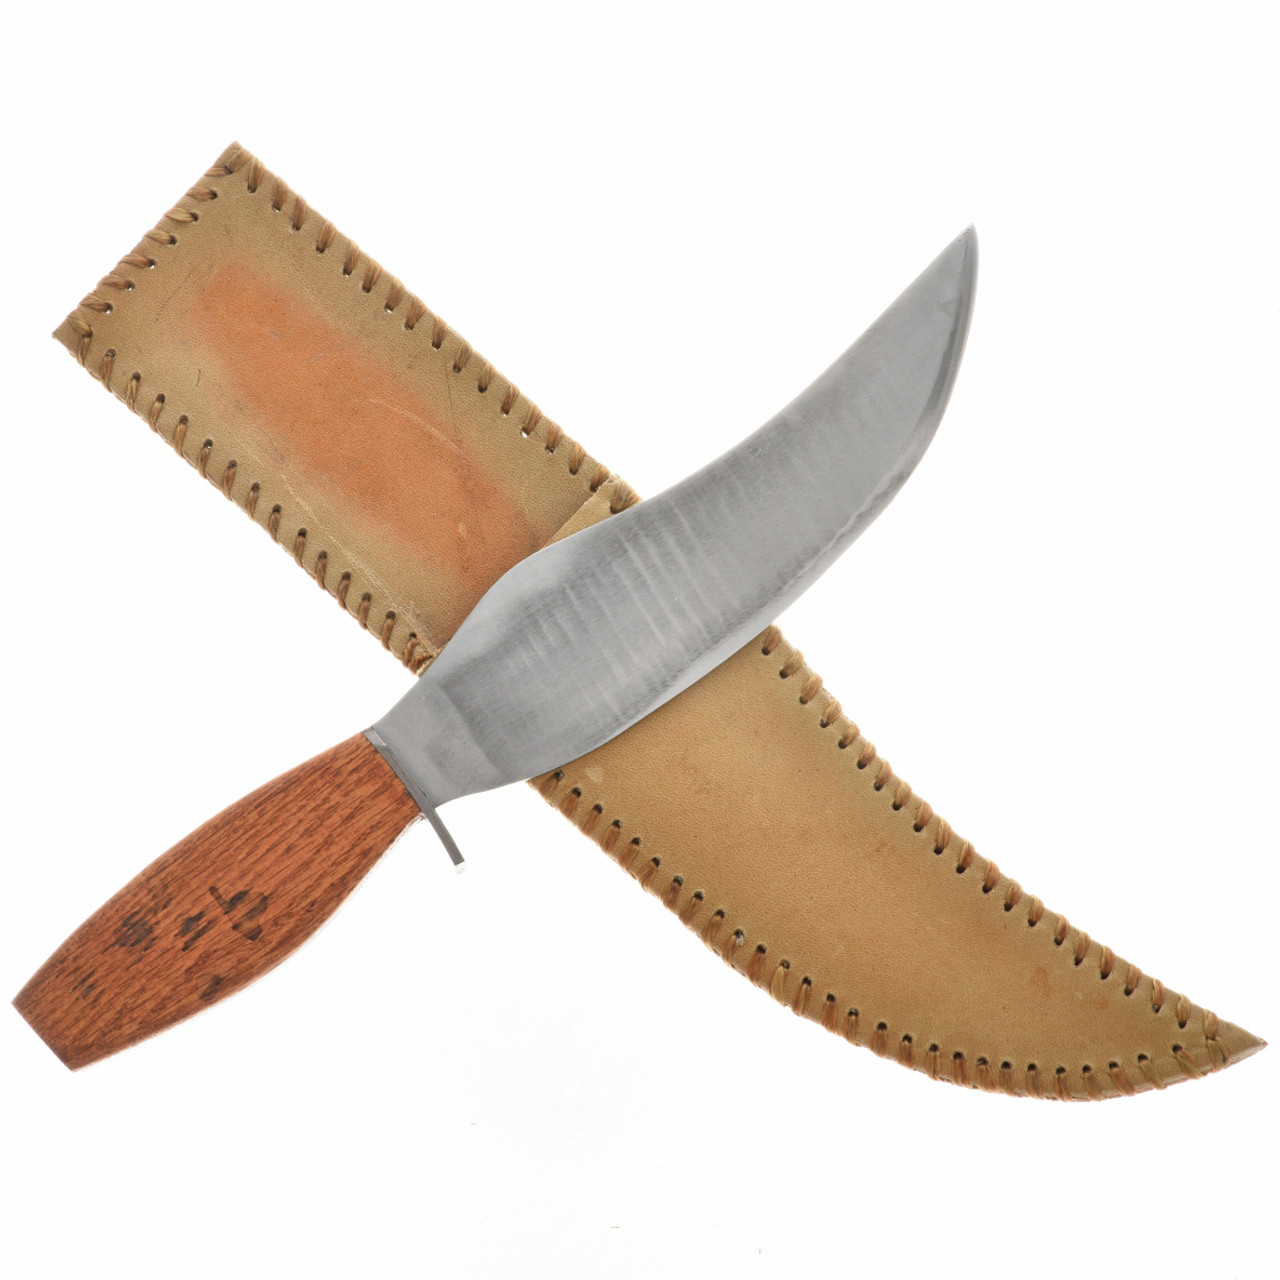 Curved Skinner Knife - Wooden Hand Crafted Steel Knife - Hand Crafted Knife